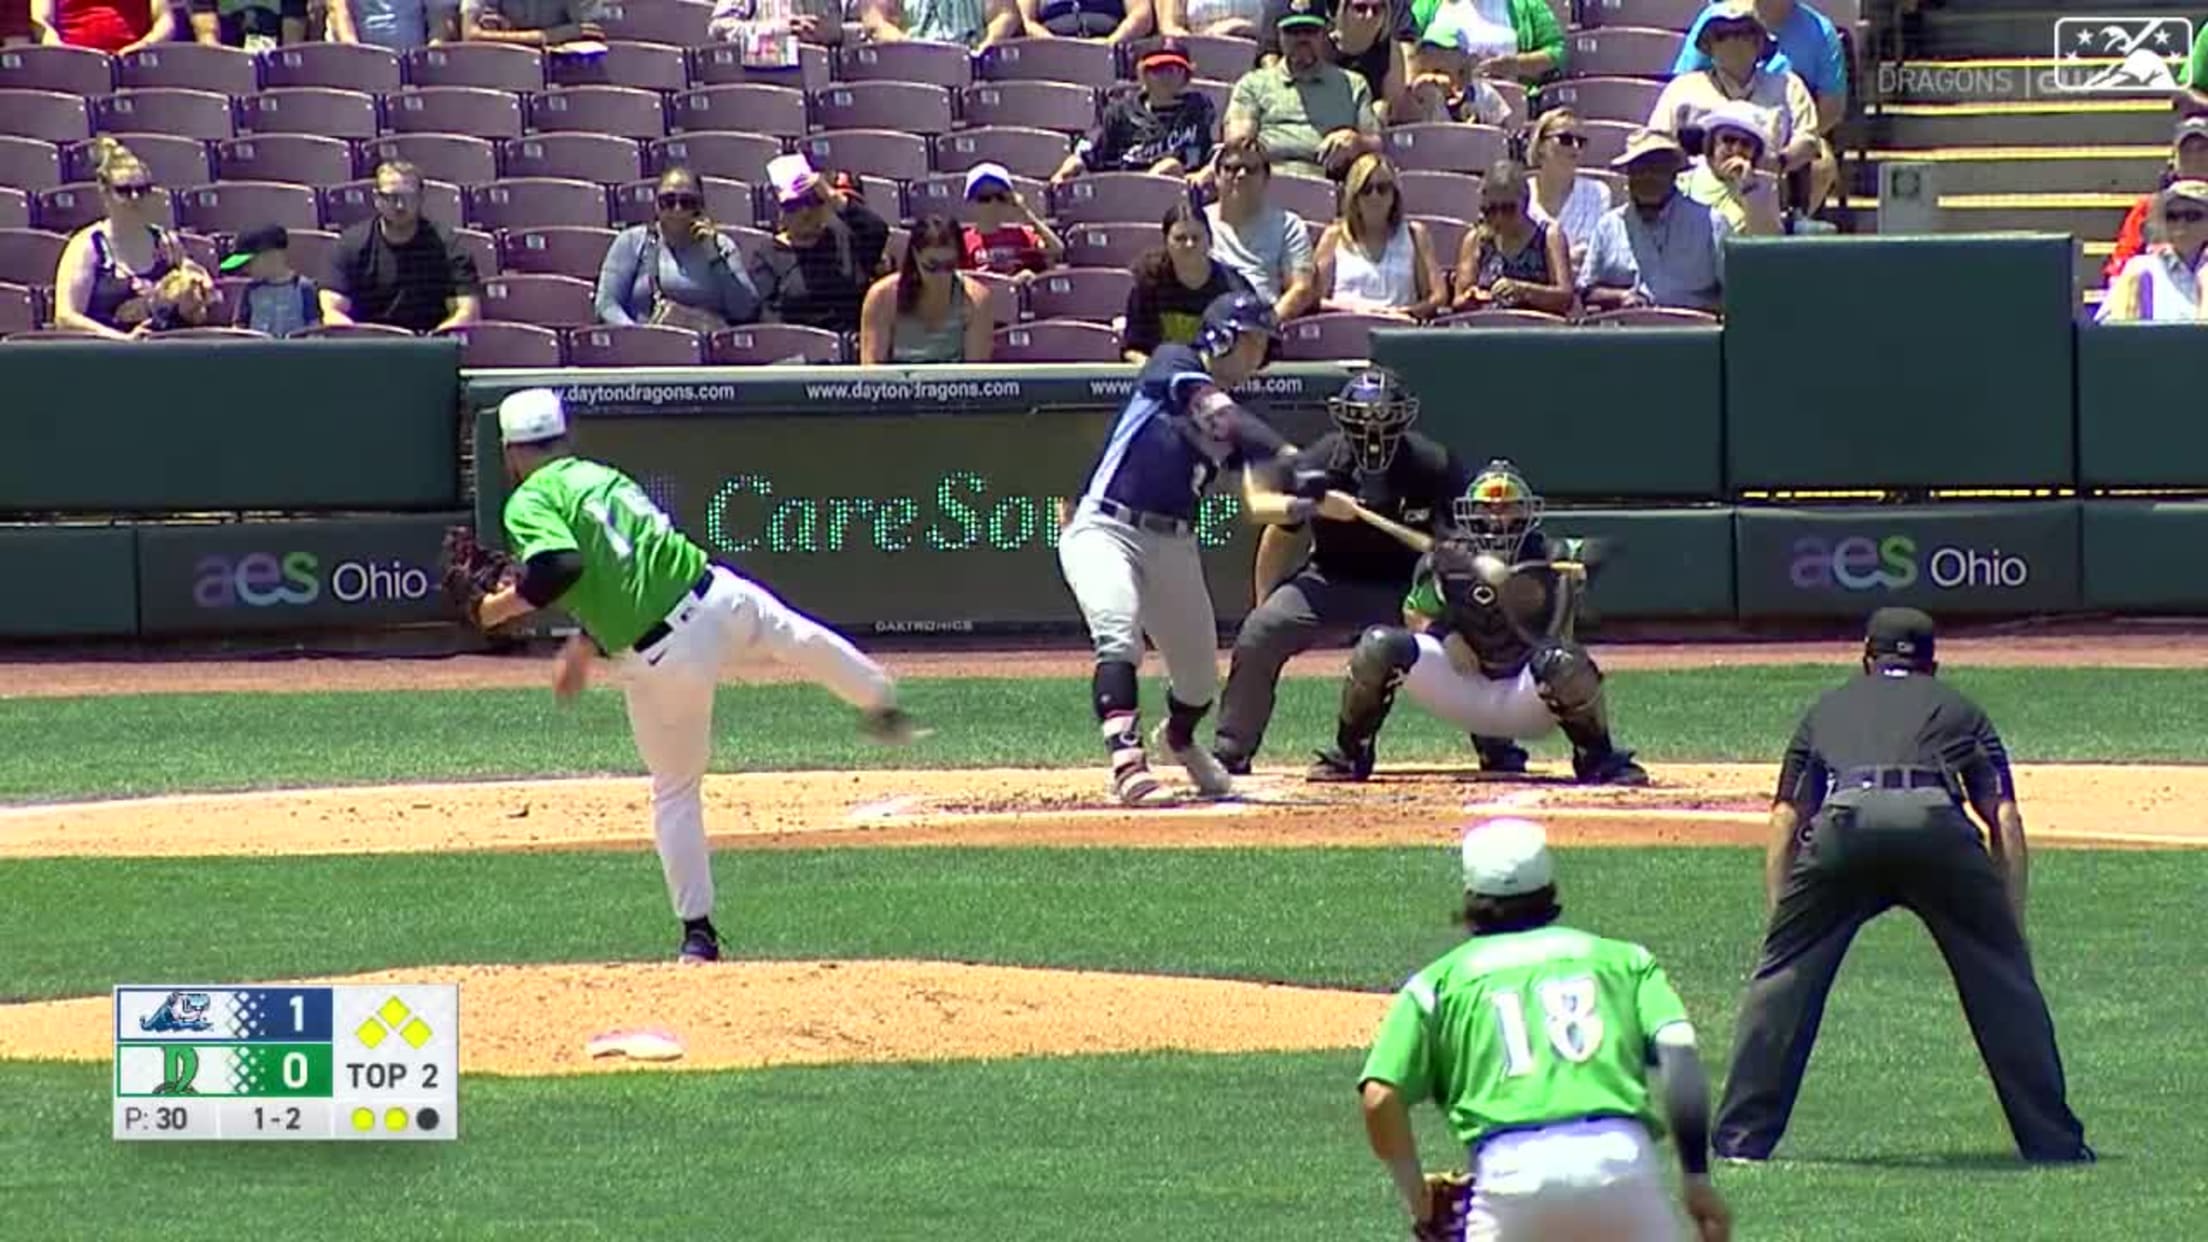 Jace Jung's two-run single